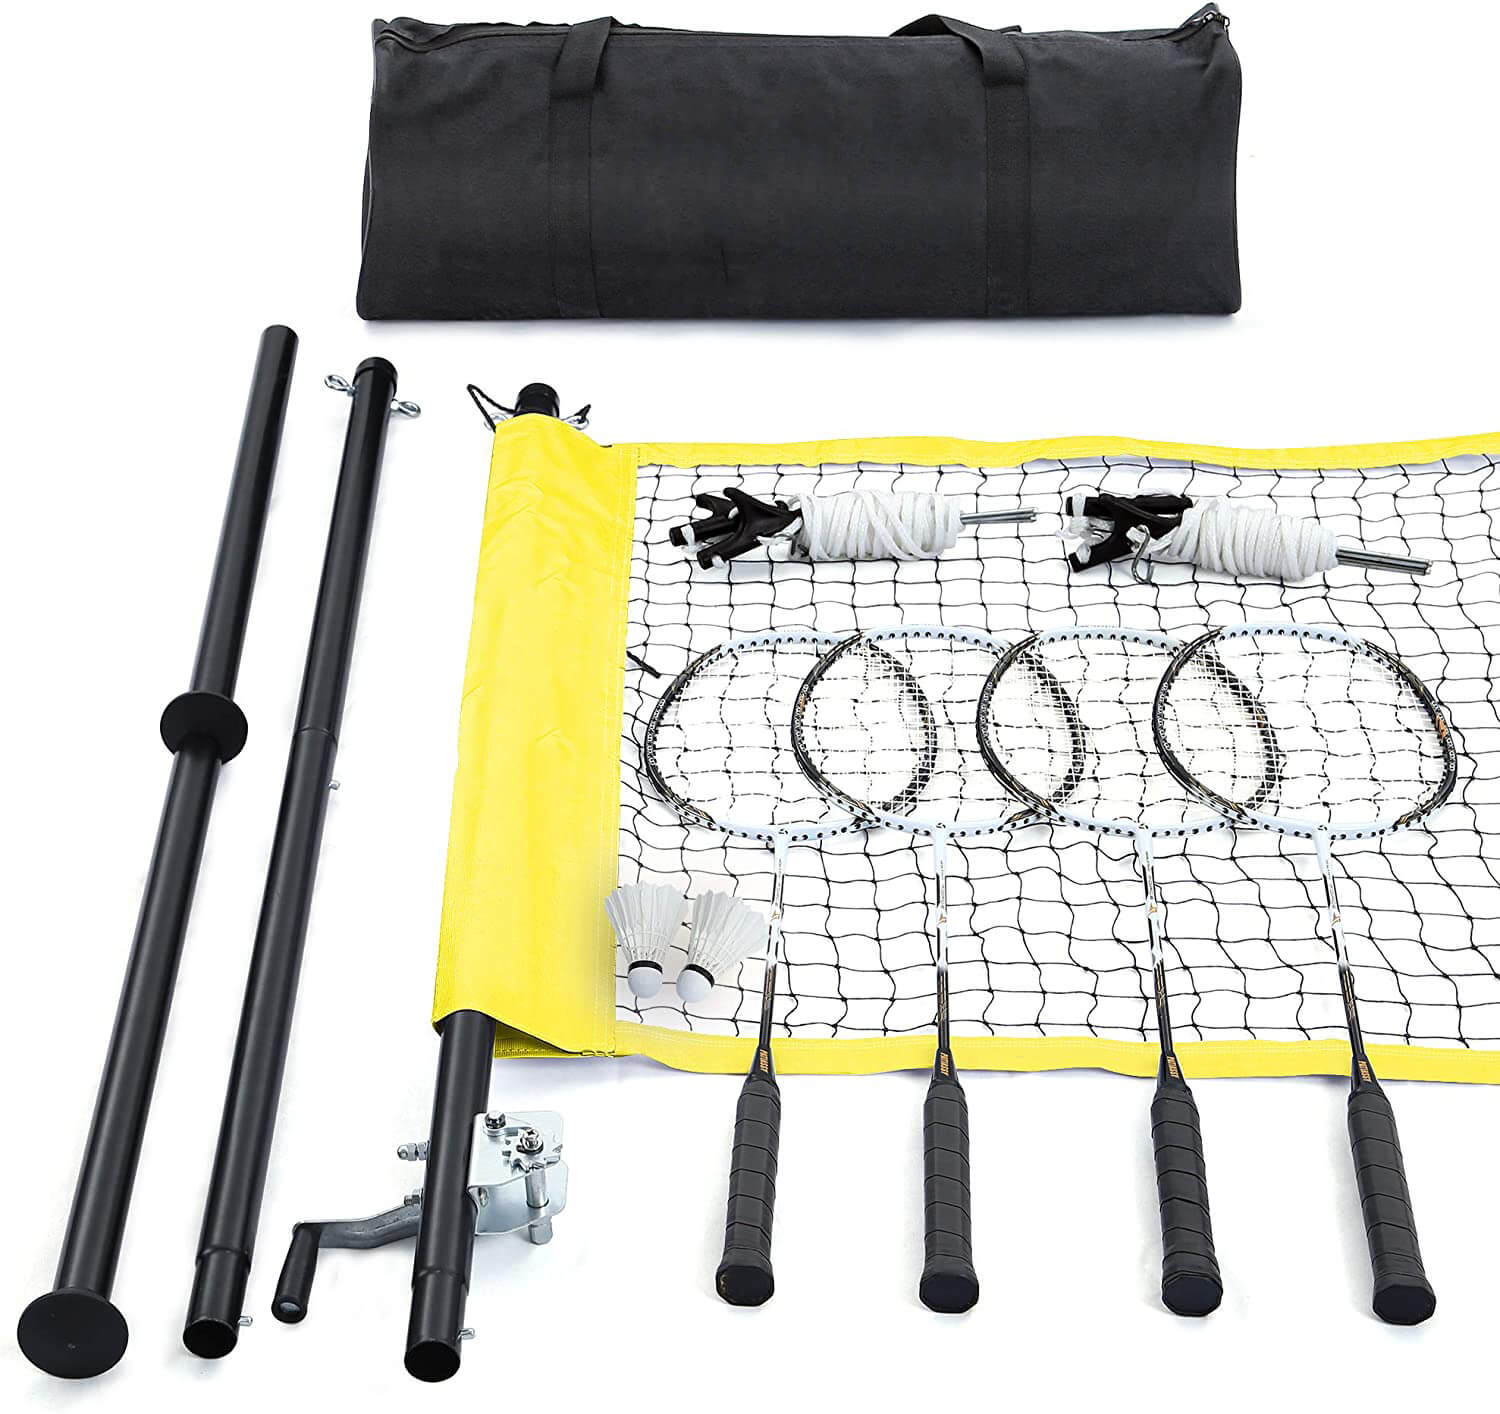 Patiassy Outdoor Portable Badminton Net Set with Winch System for Backyard Beach